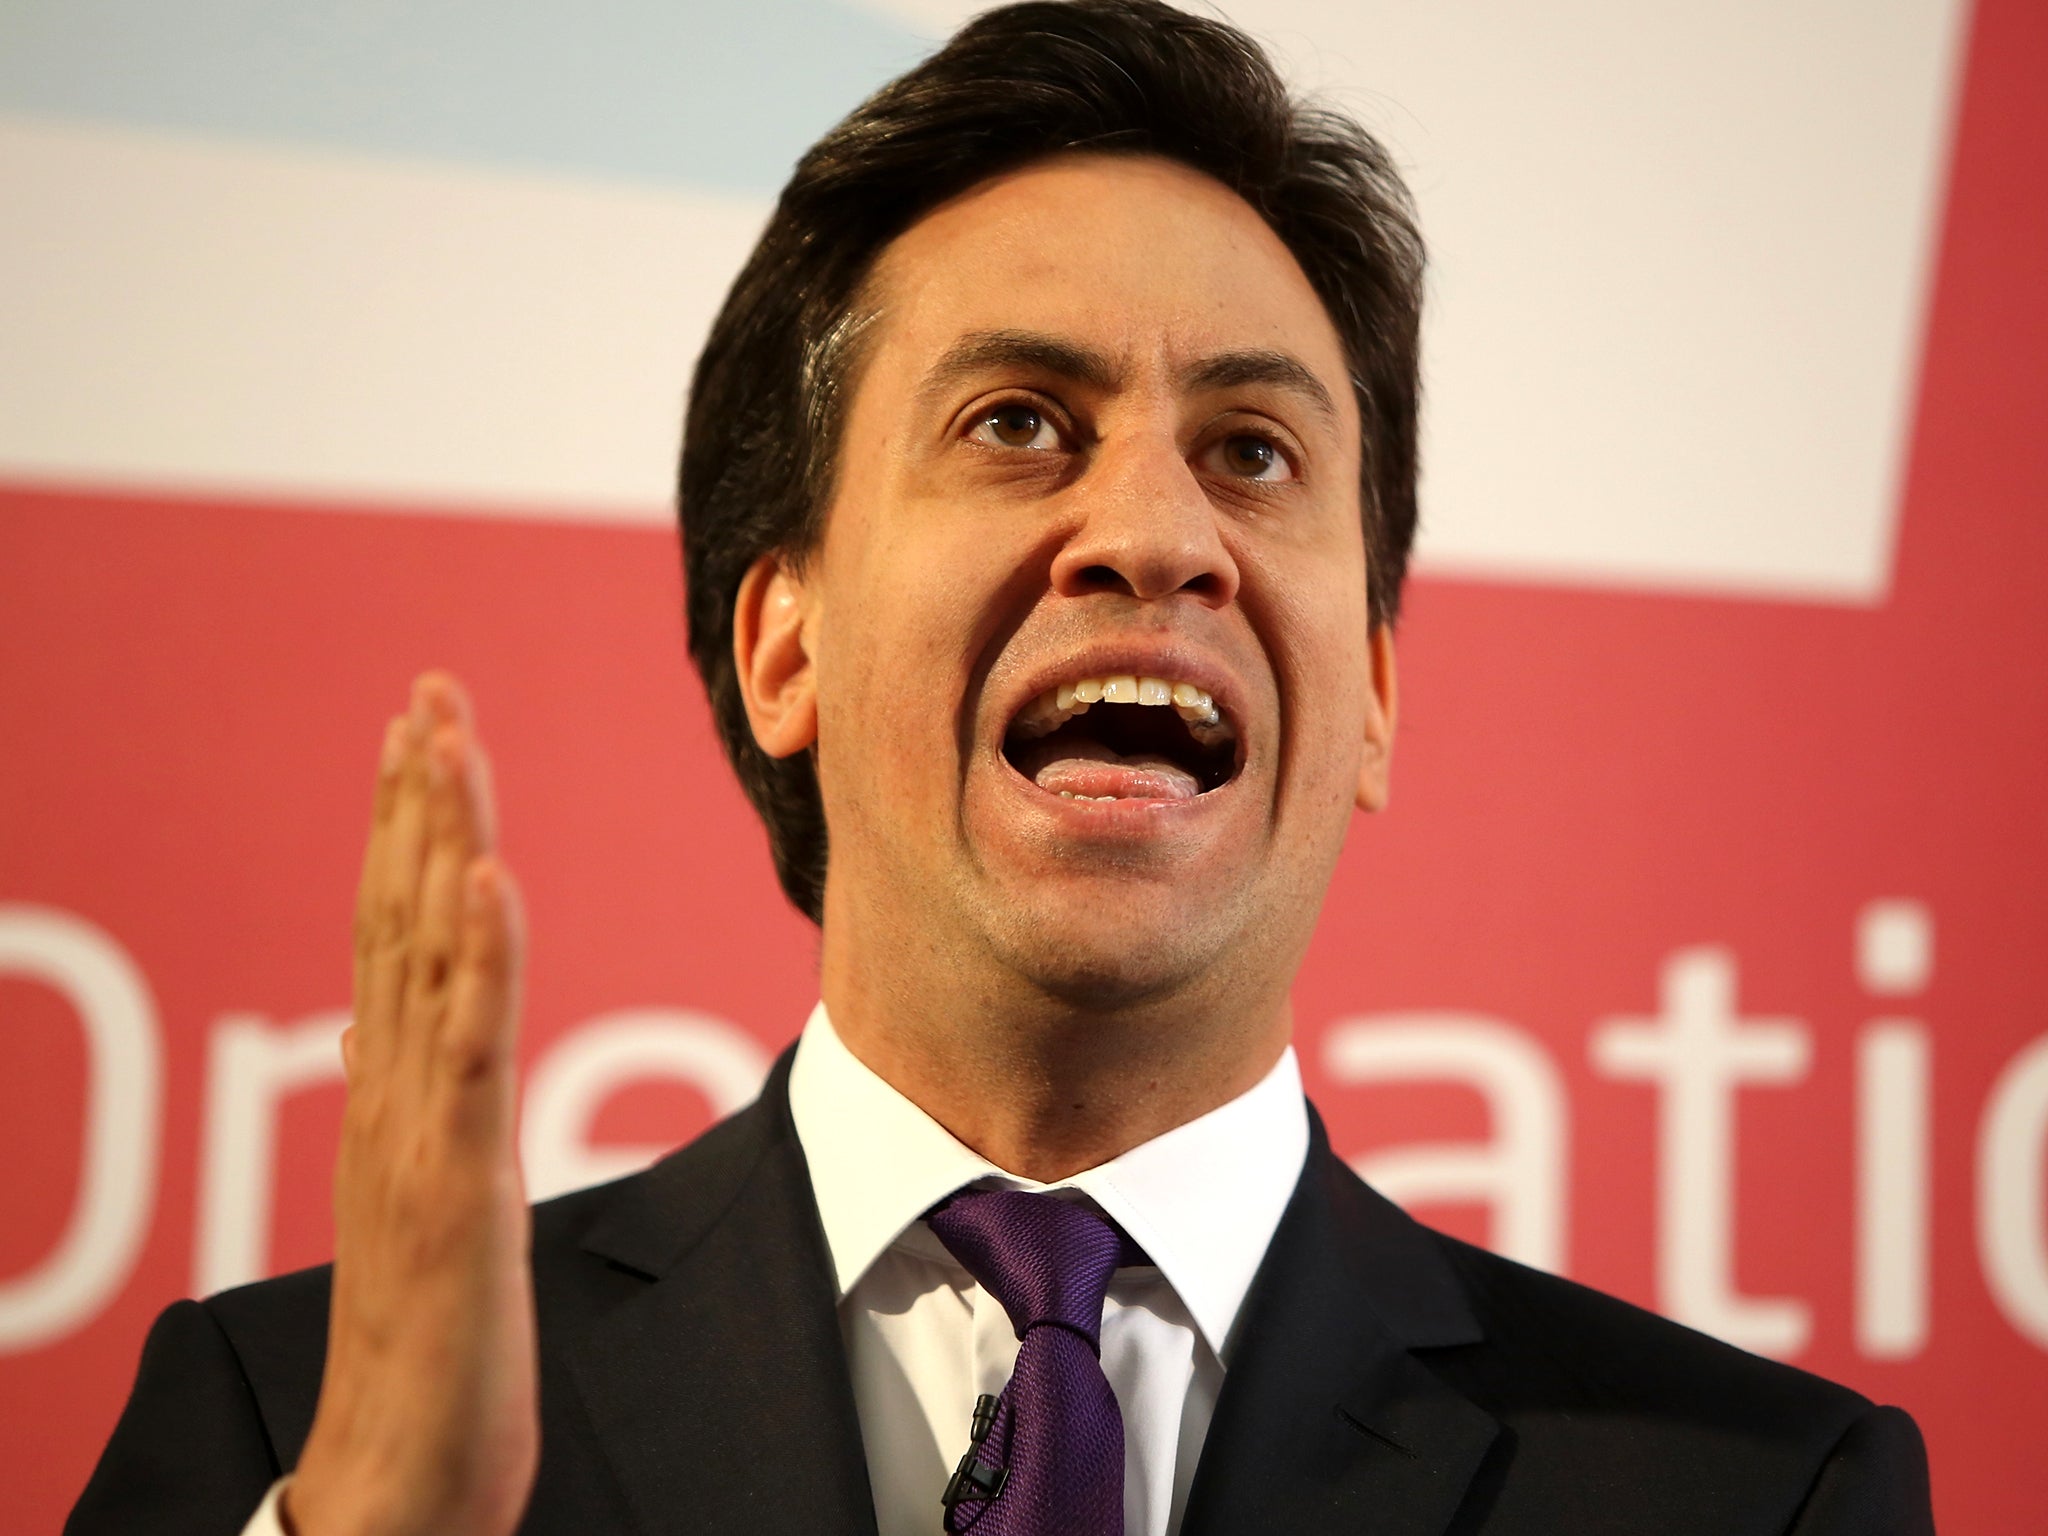 The current figures would give Ed Miliband a majority of 32 at a general election